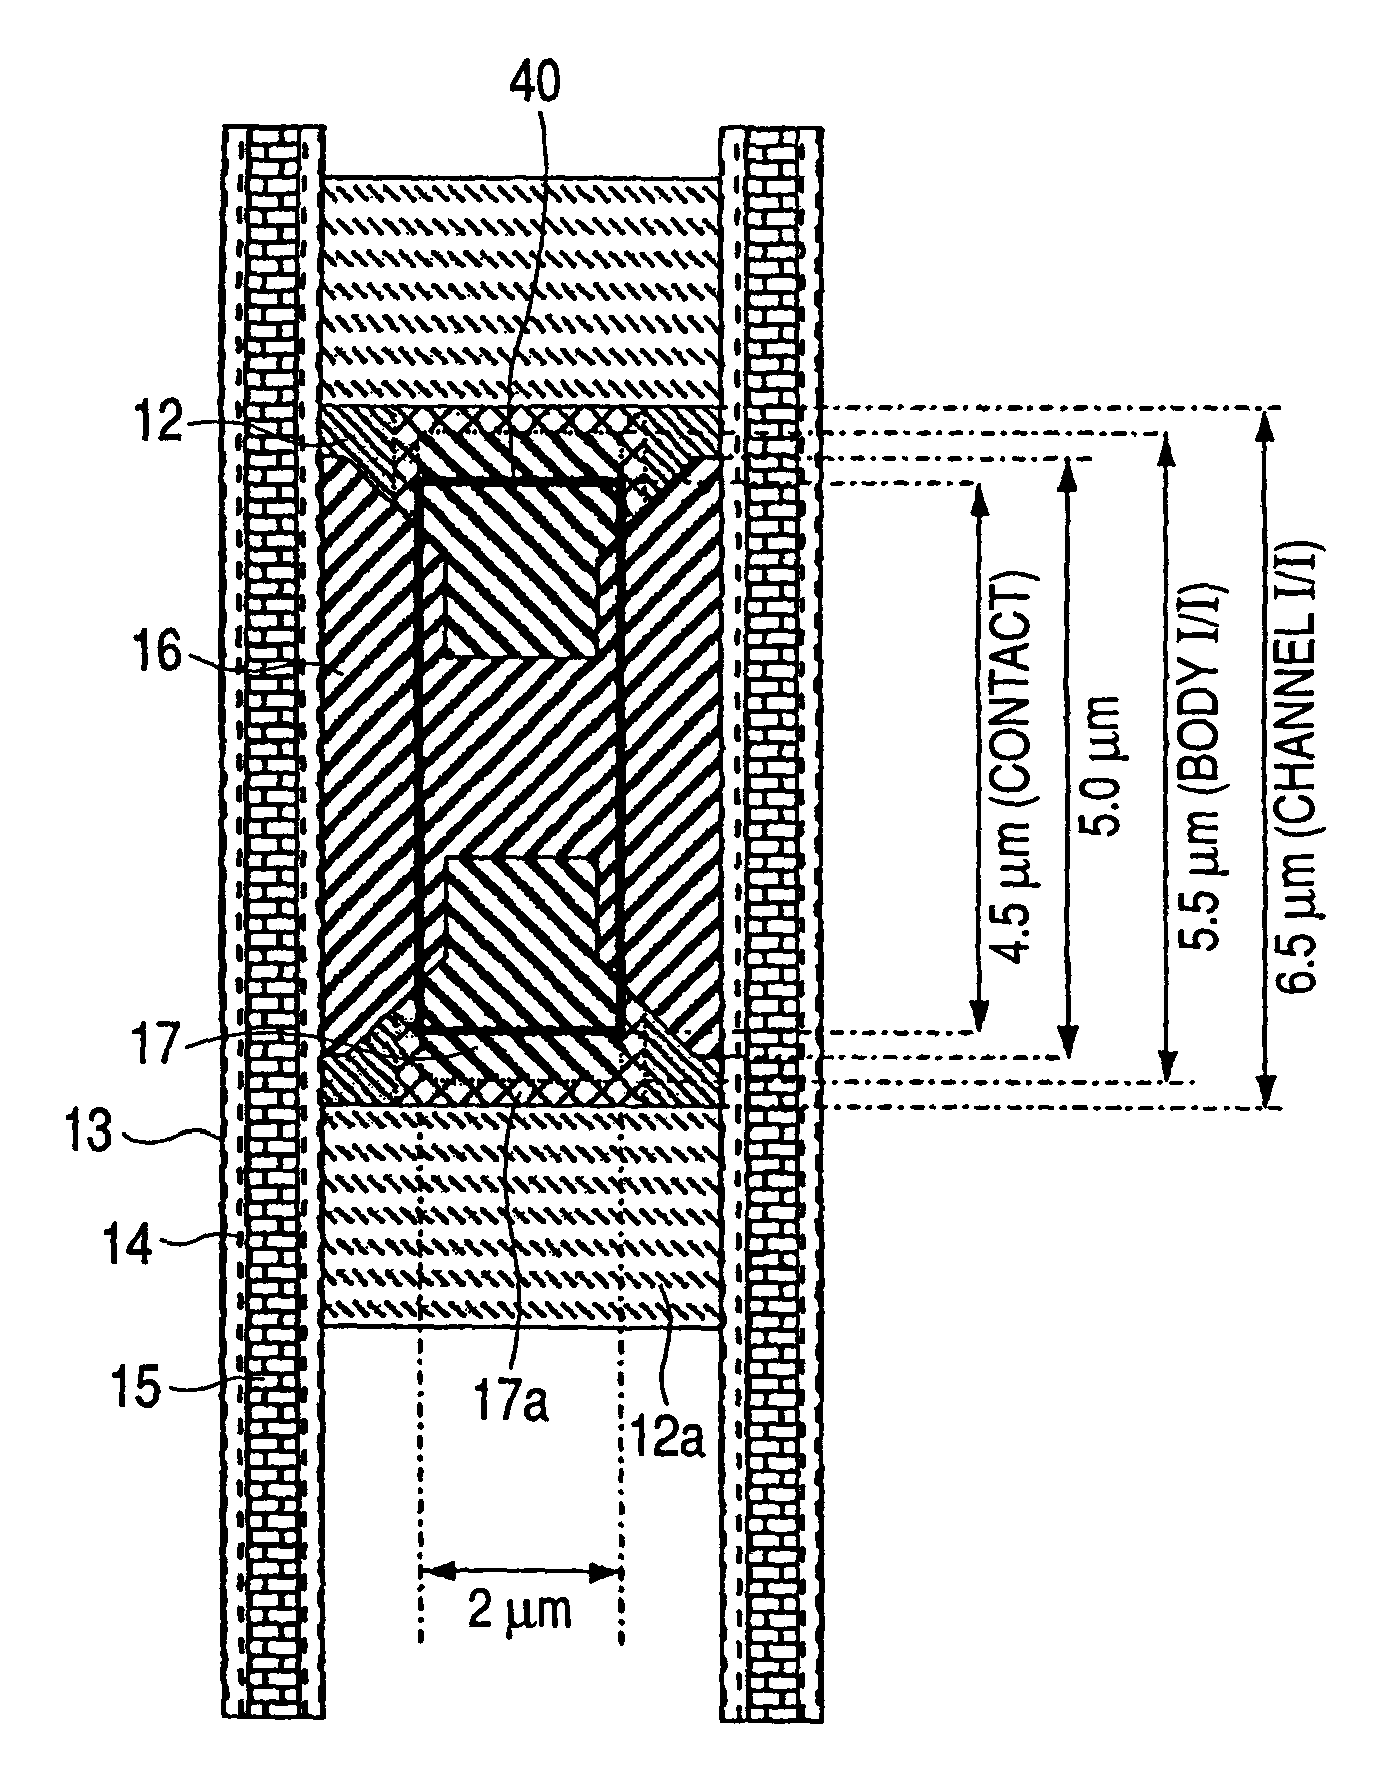 Vertical and trench type insulated gate MOS semiconductor device